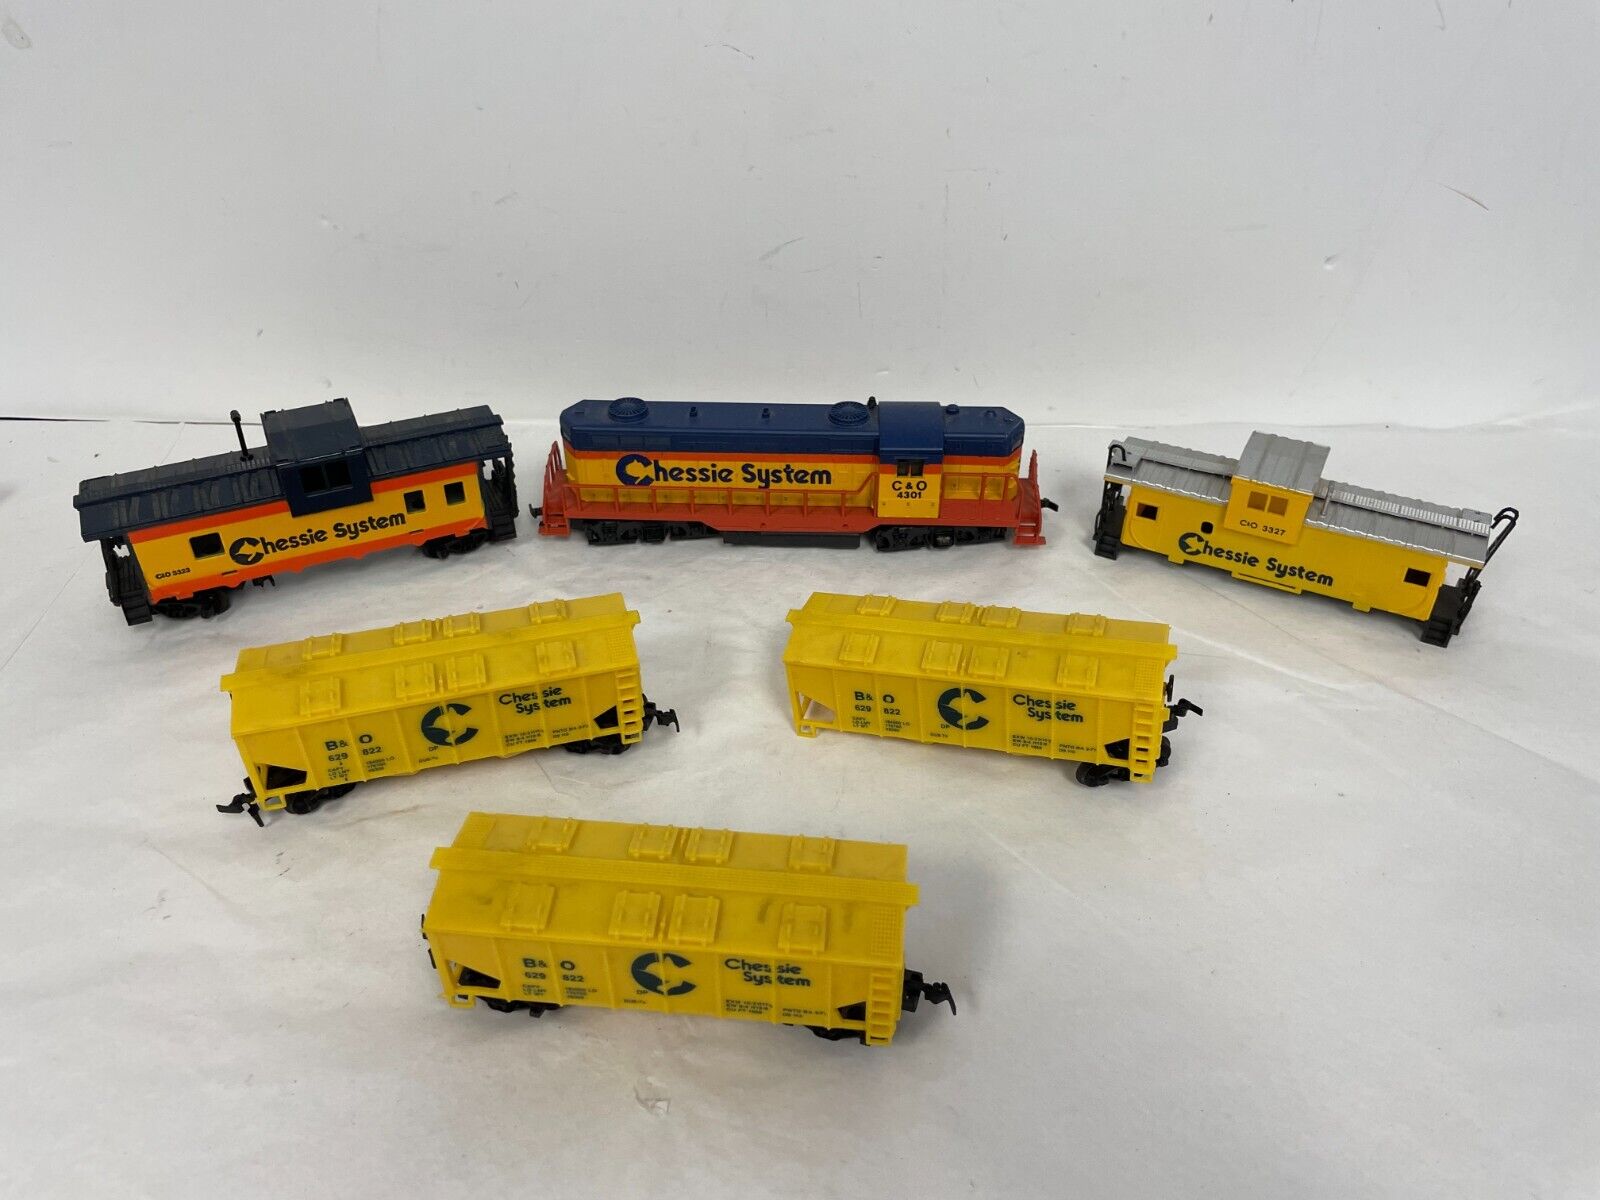 LOT x6 C&O B&O CHESSIE SYSTEM Caboose 4301 Carriages Locomotive - BACHMANN HO